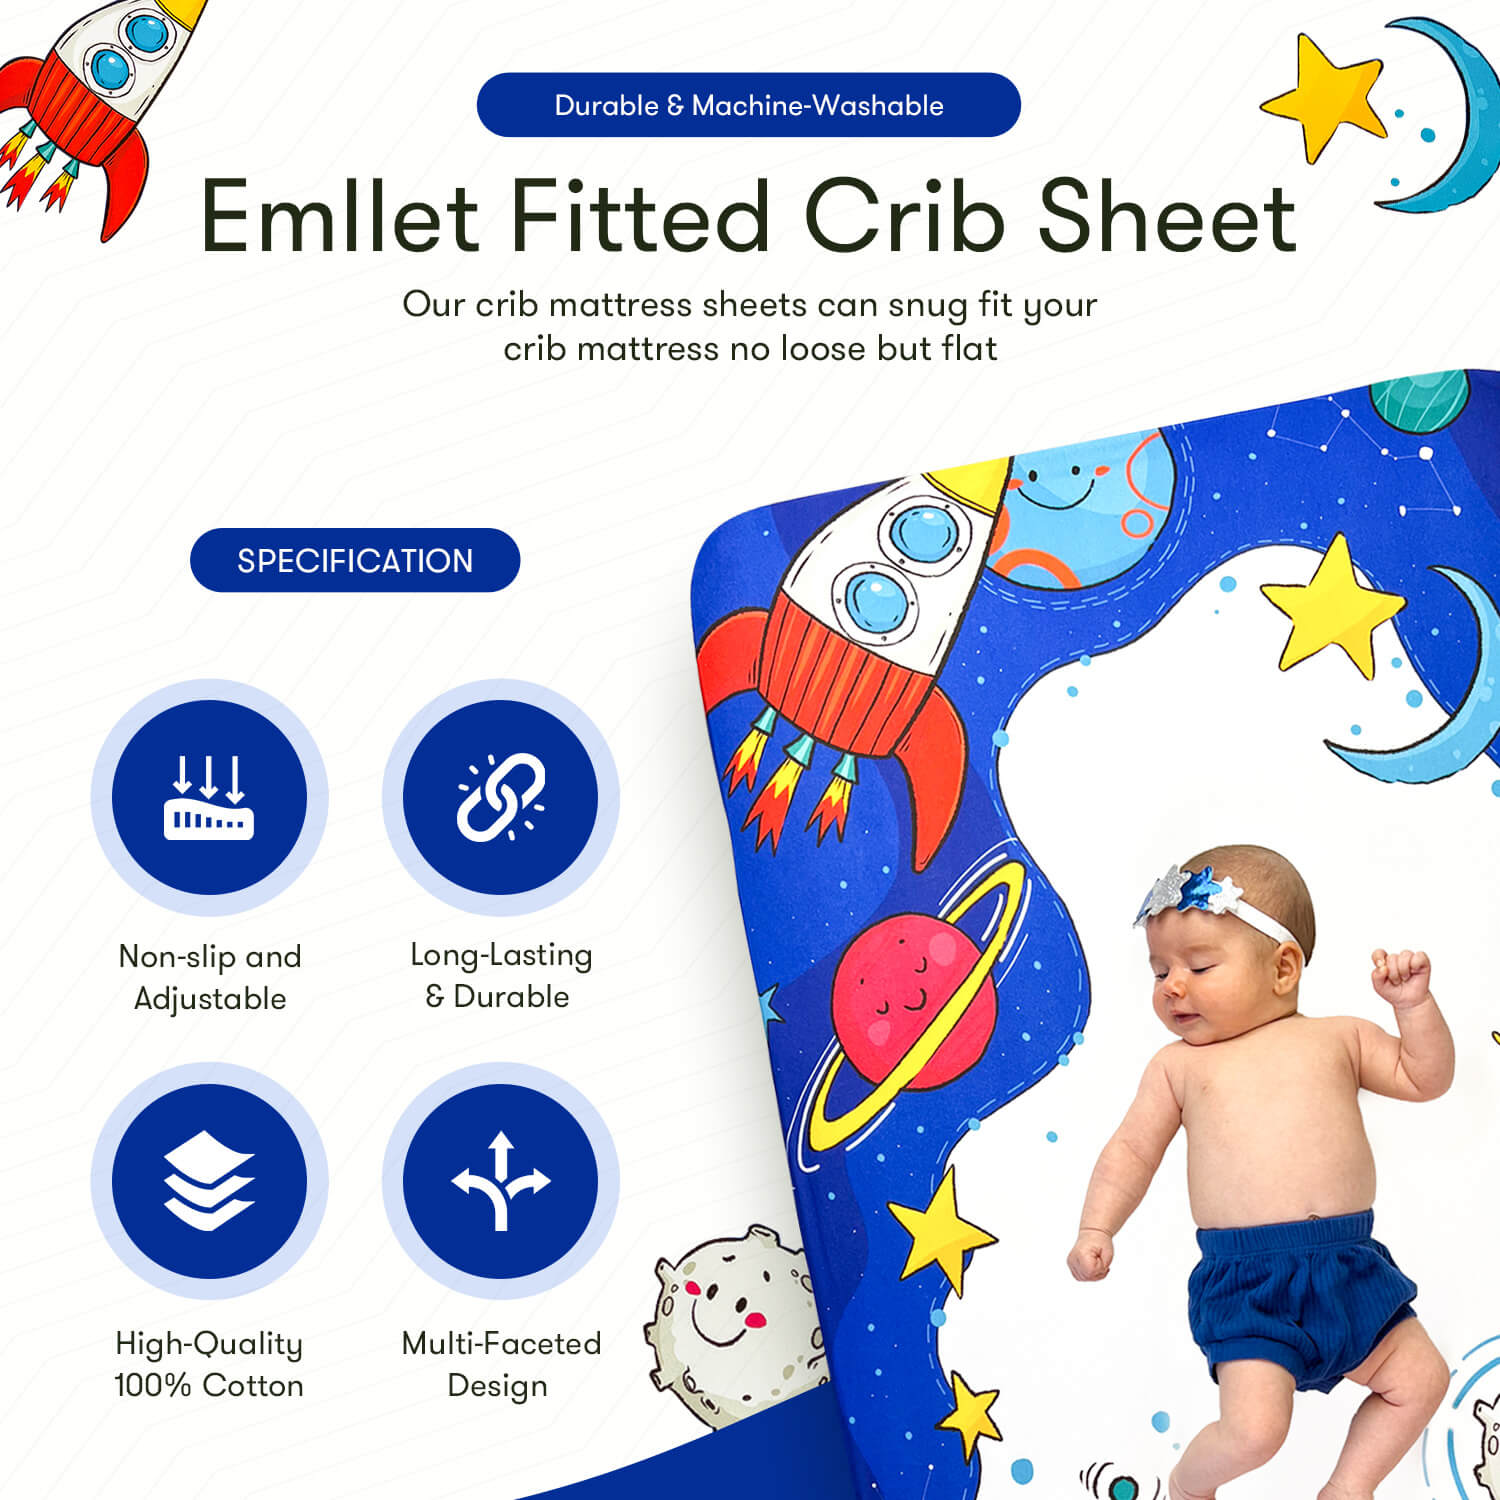 Emllet Space Crib Sheet, specification